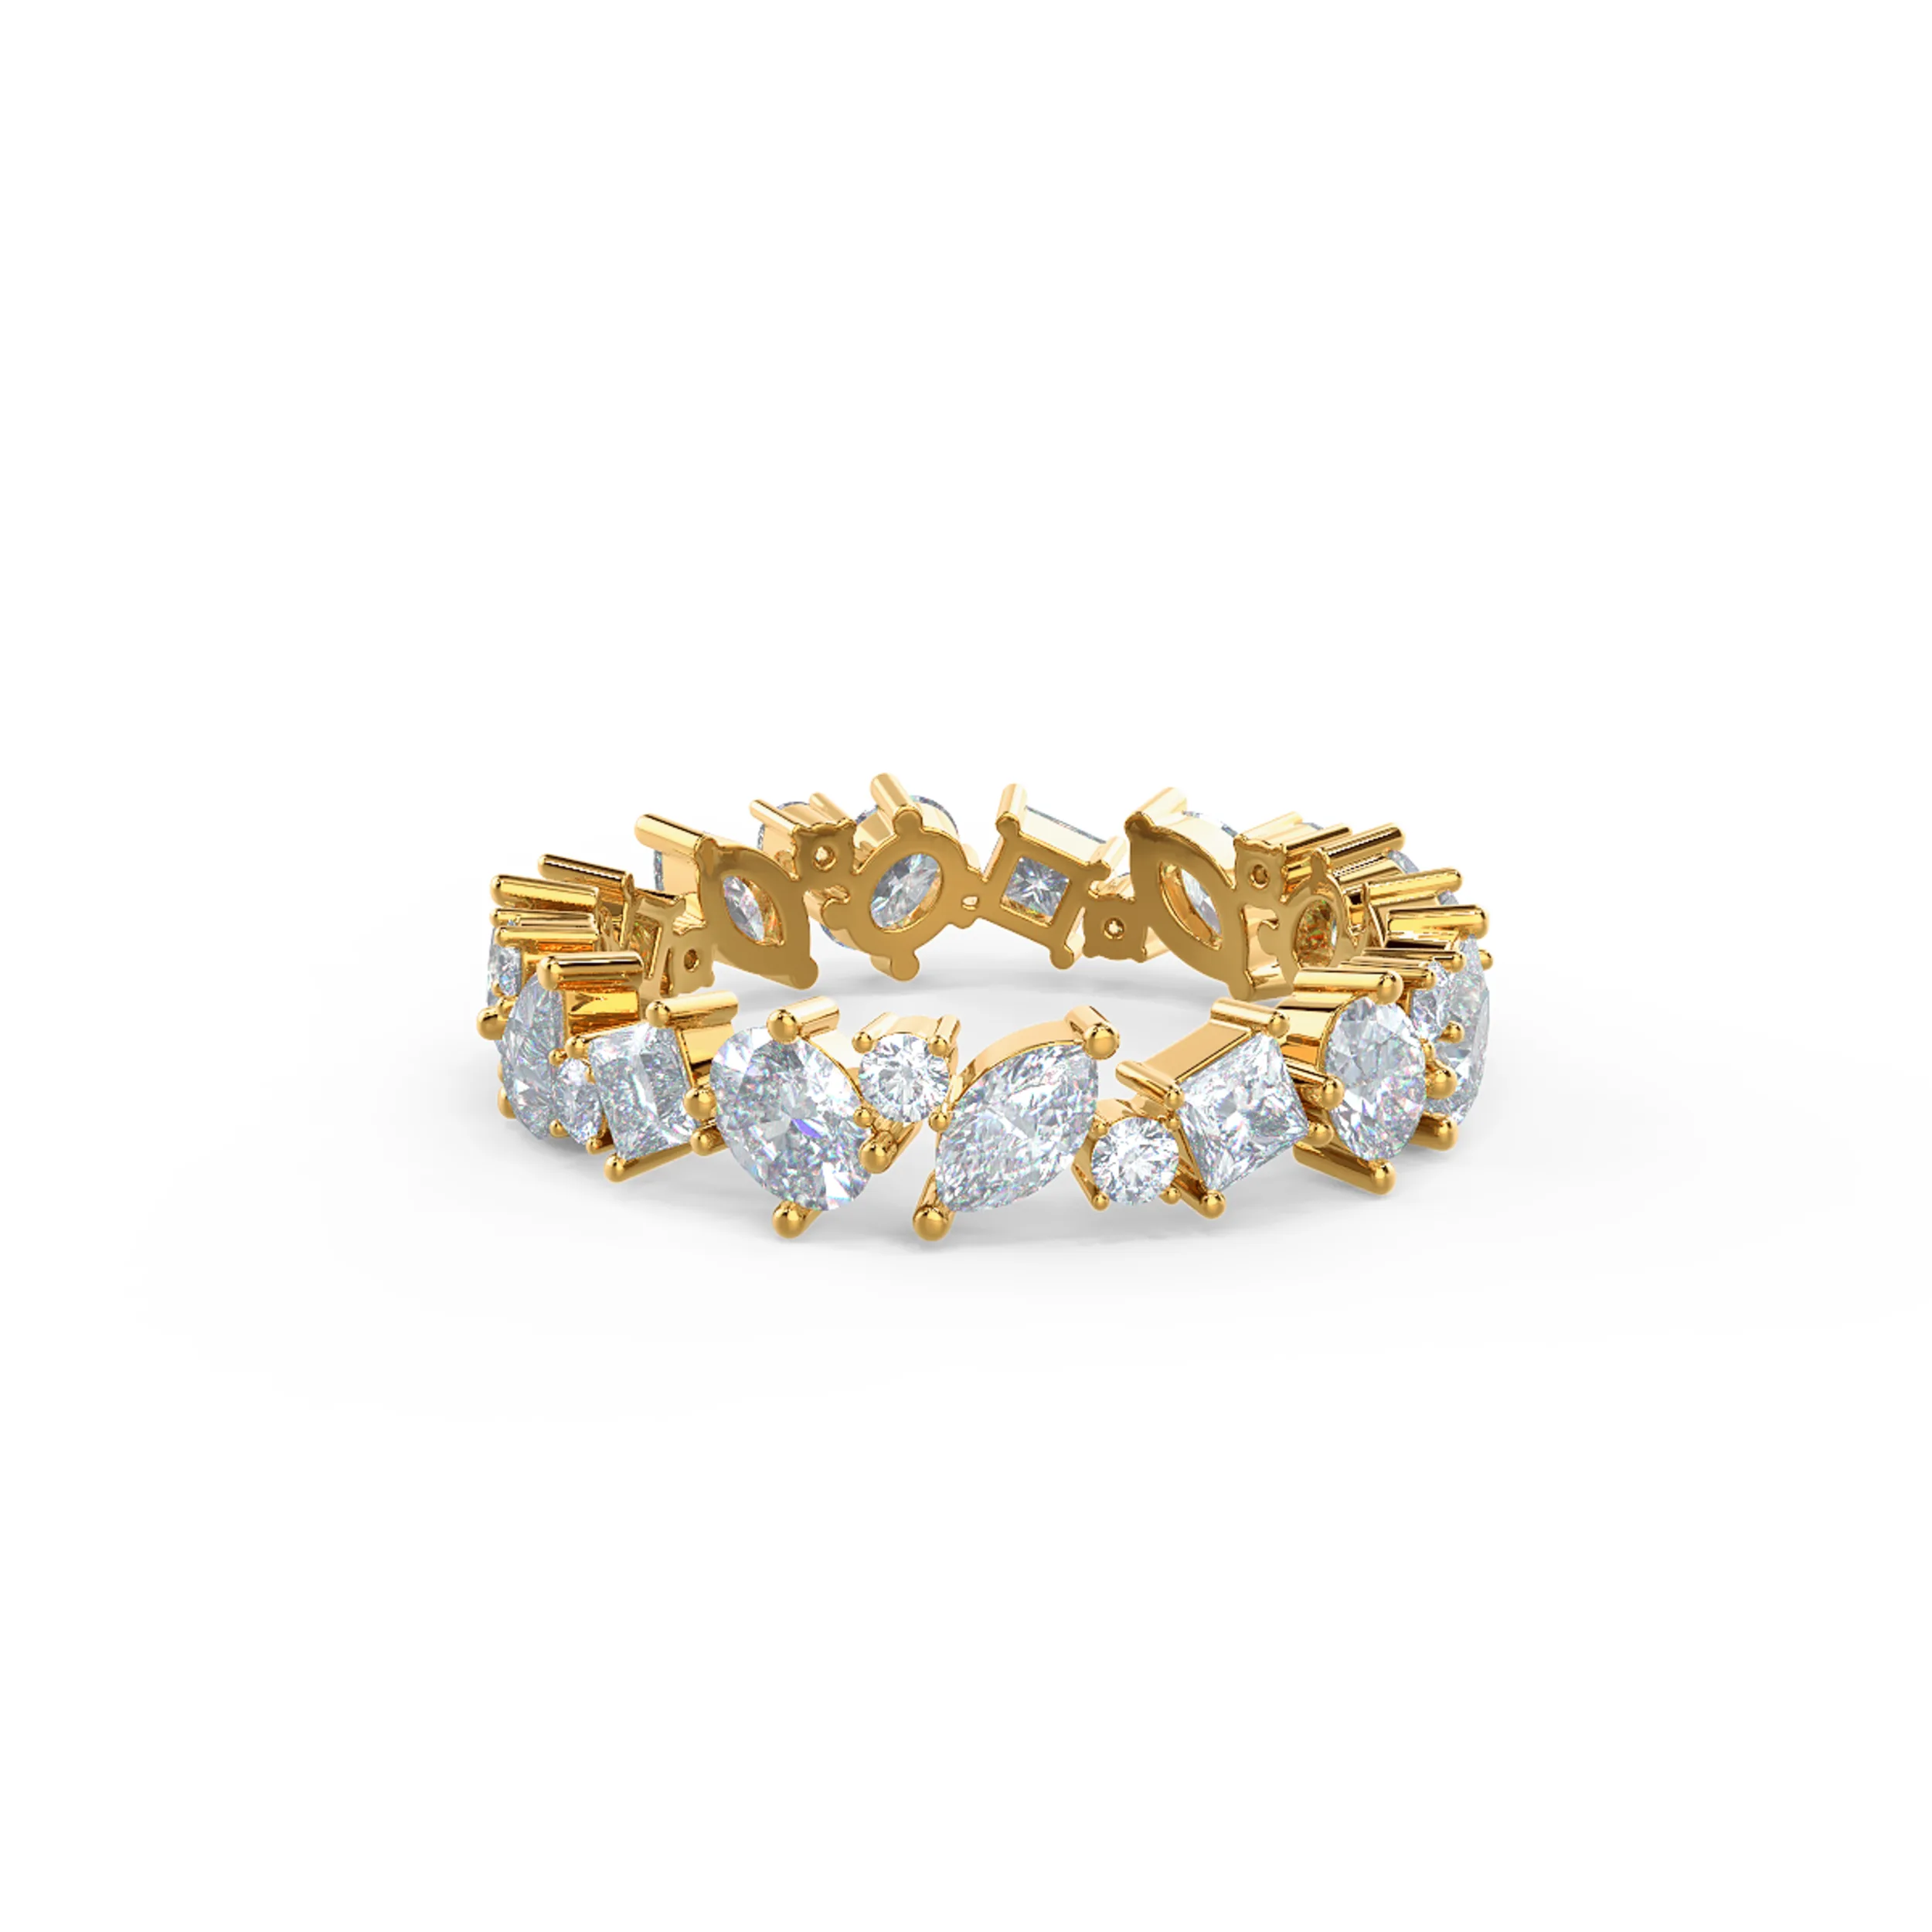 18k Yellow Gold Sara Eternity Band featuring Exceptional Quality 2.0 Carat Diamonds (Main View)